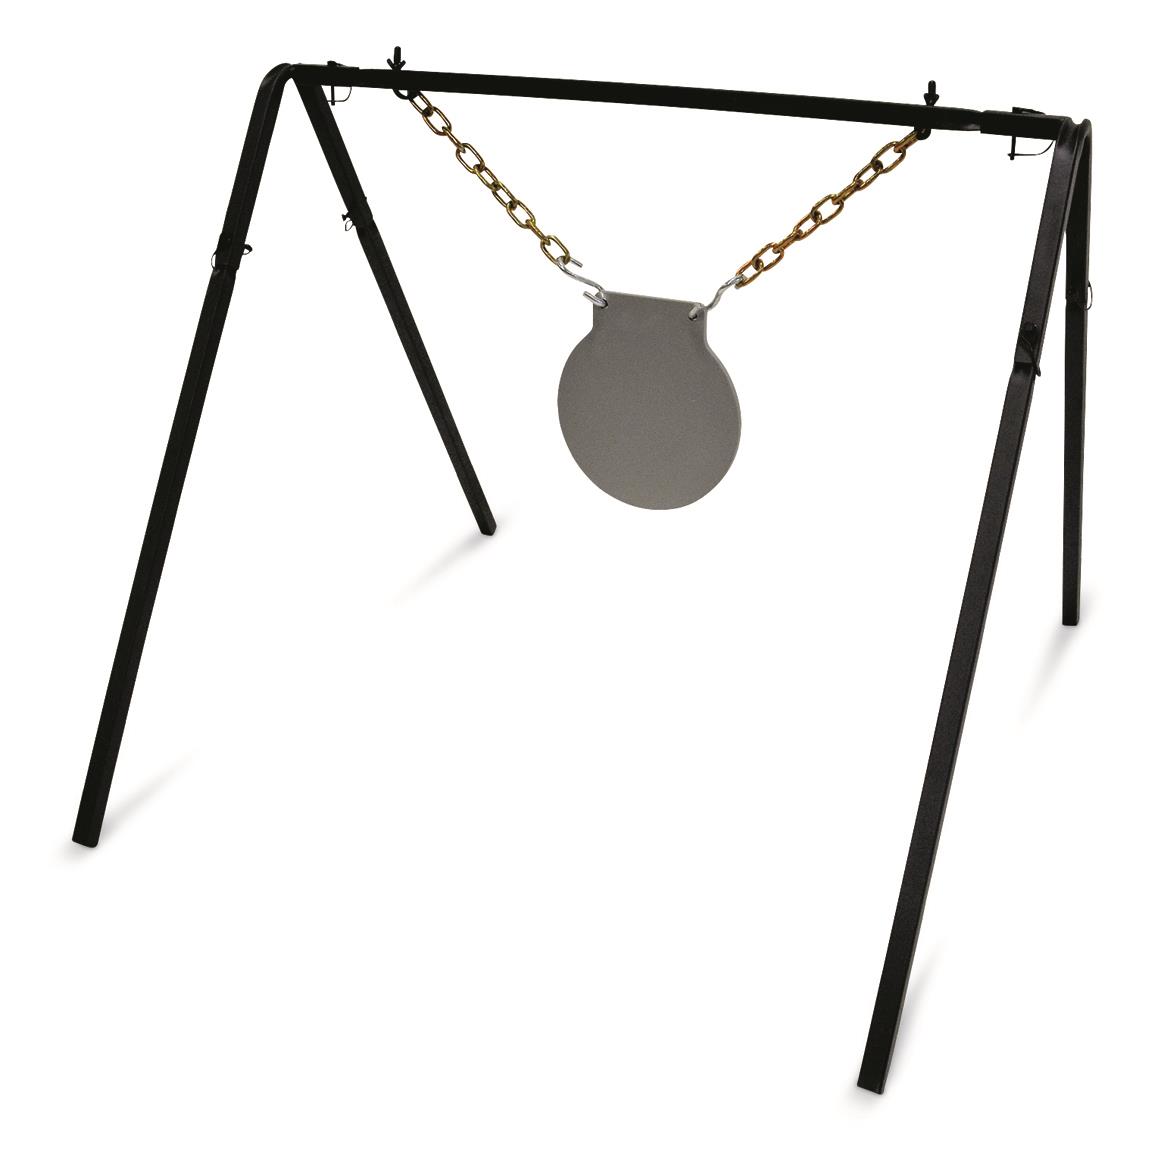 Copper Ridge AR500 Steel 10" Gong Target with Stand